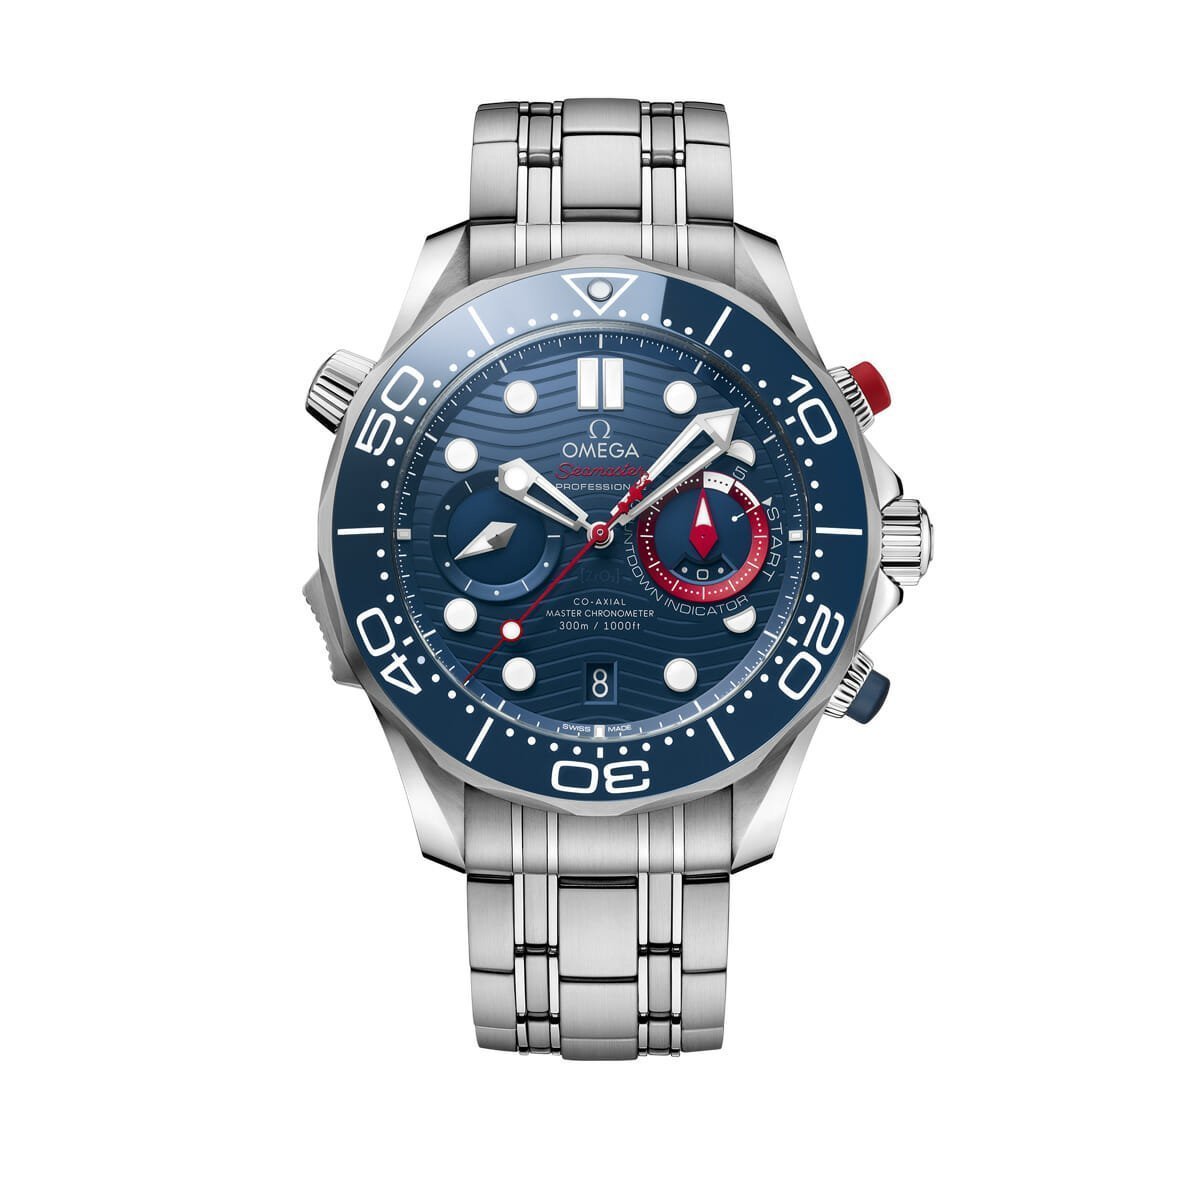 Seamaster Diver 300m Co-Axial Master Chronometer 44mm Watch